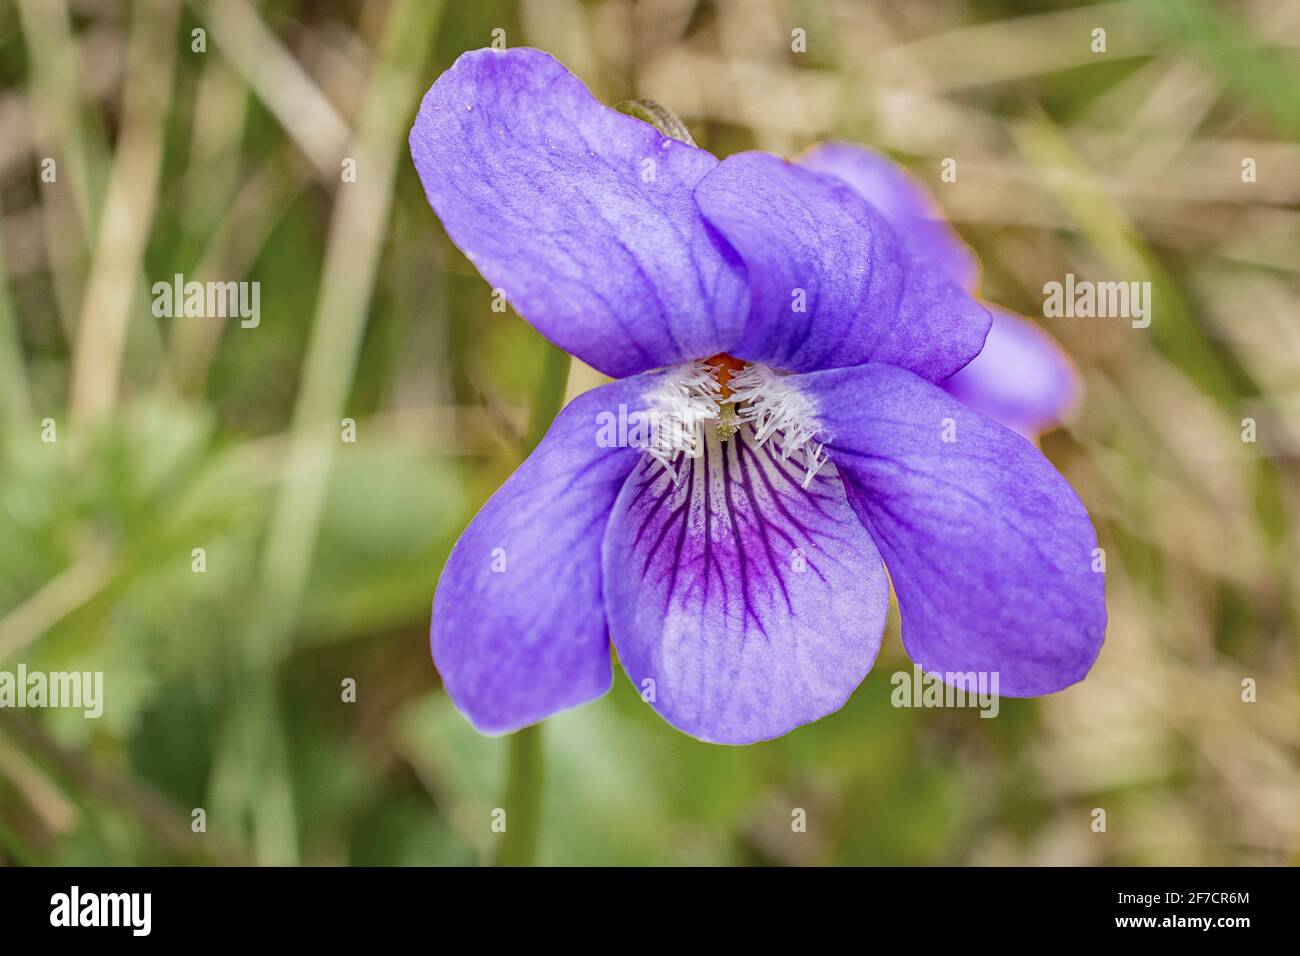 A Close up of a common blue violet flower Stock Photo